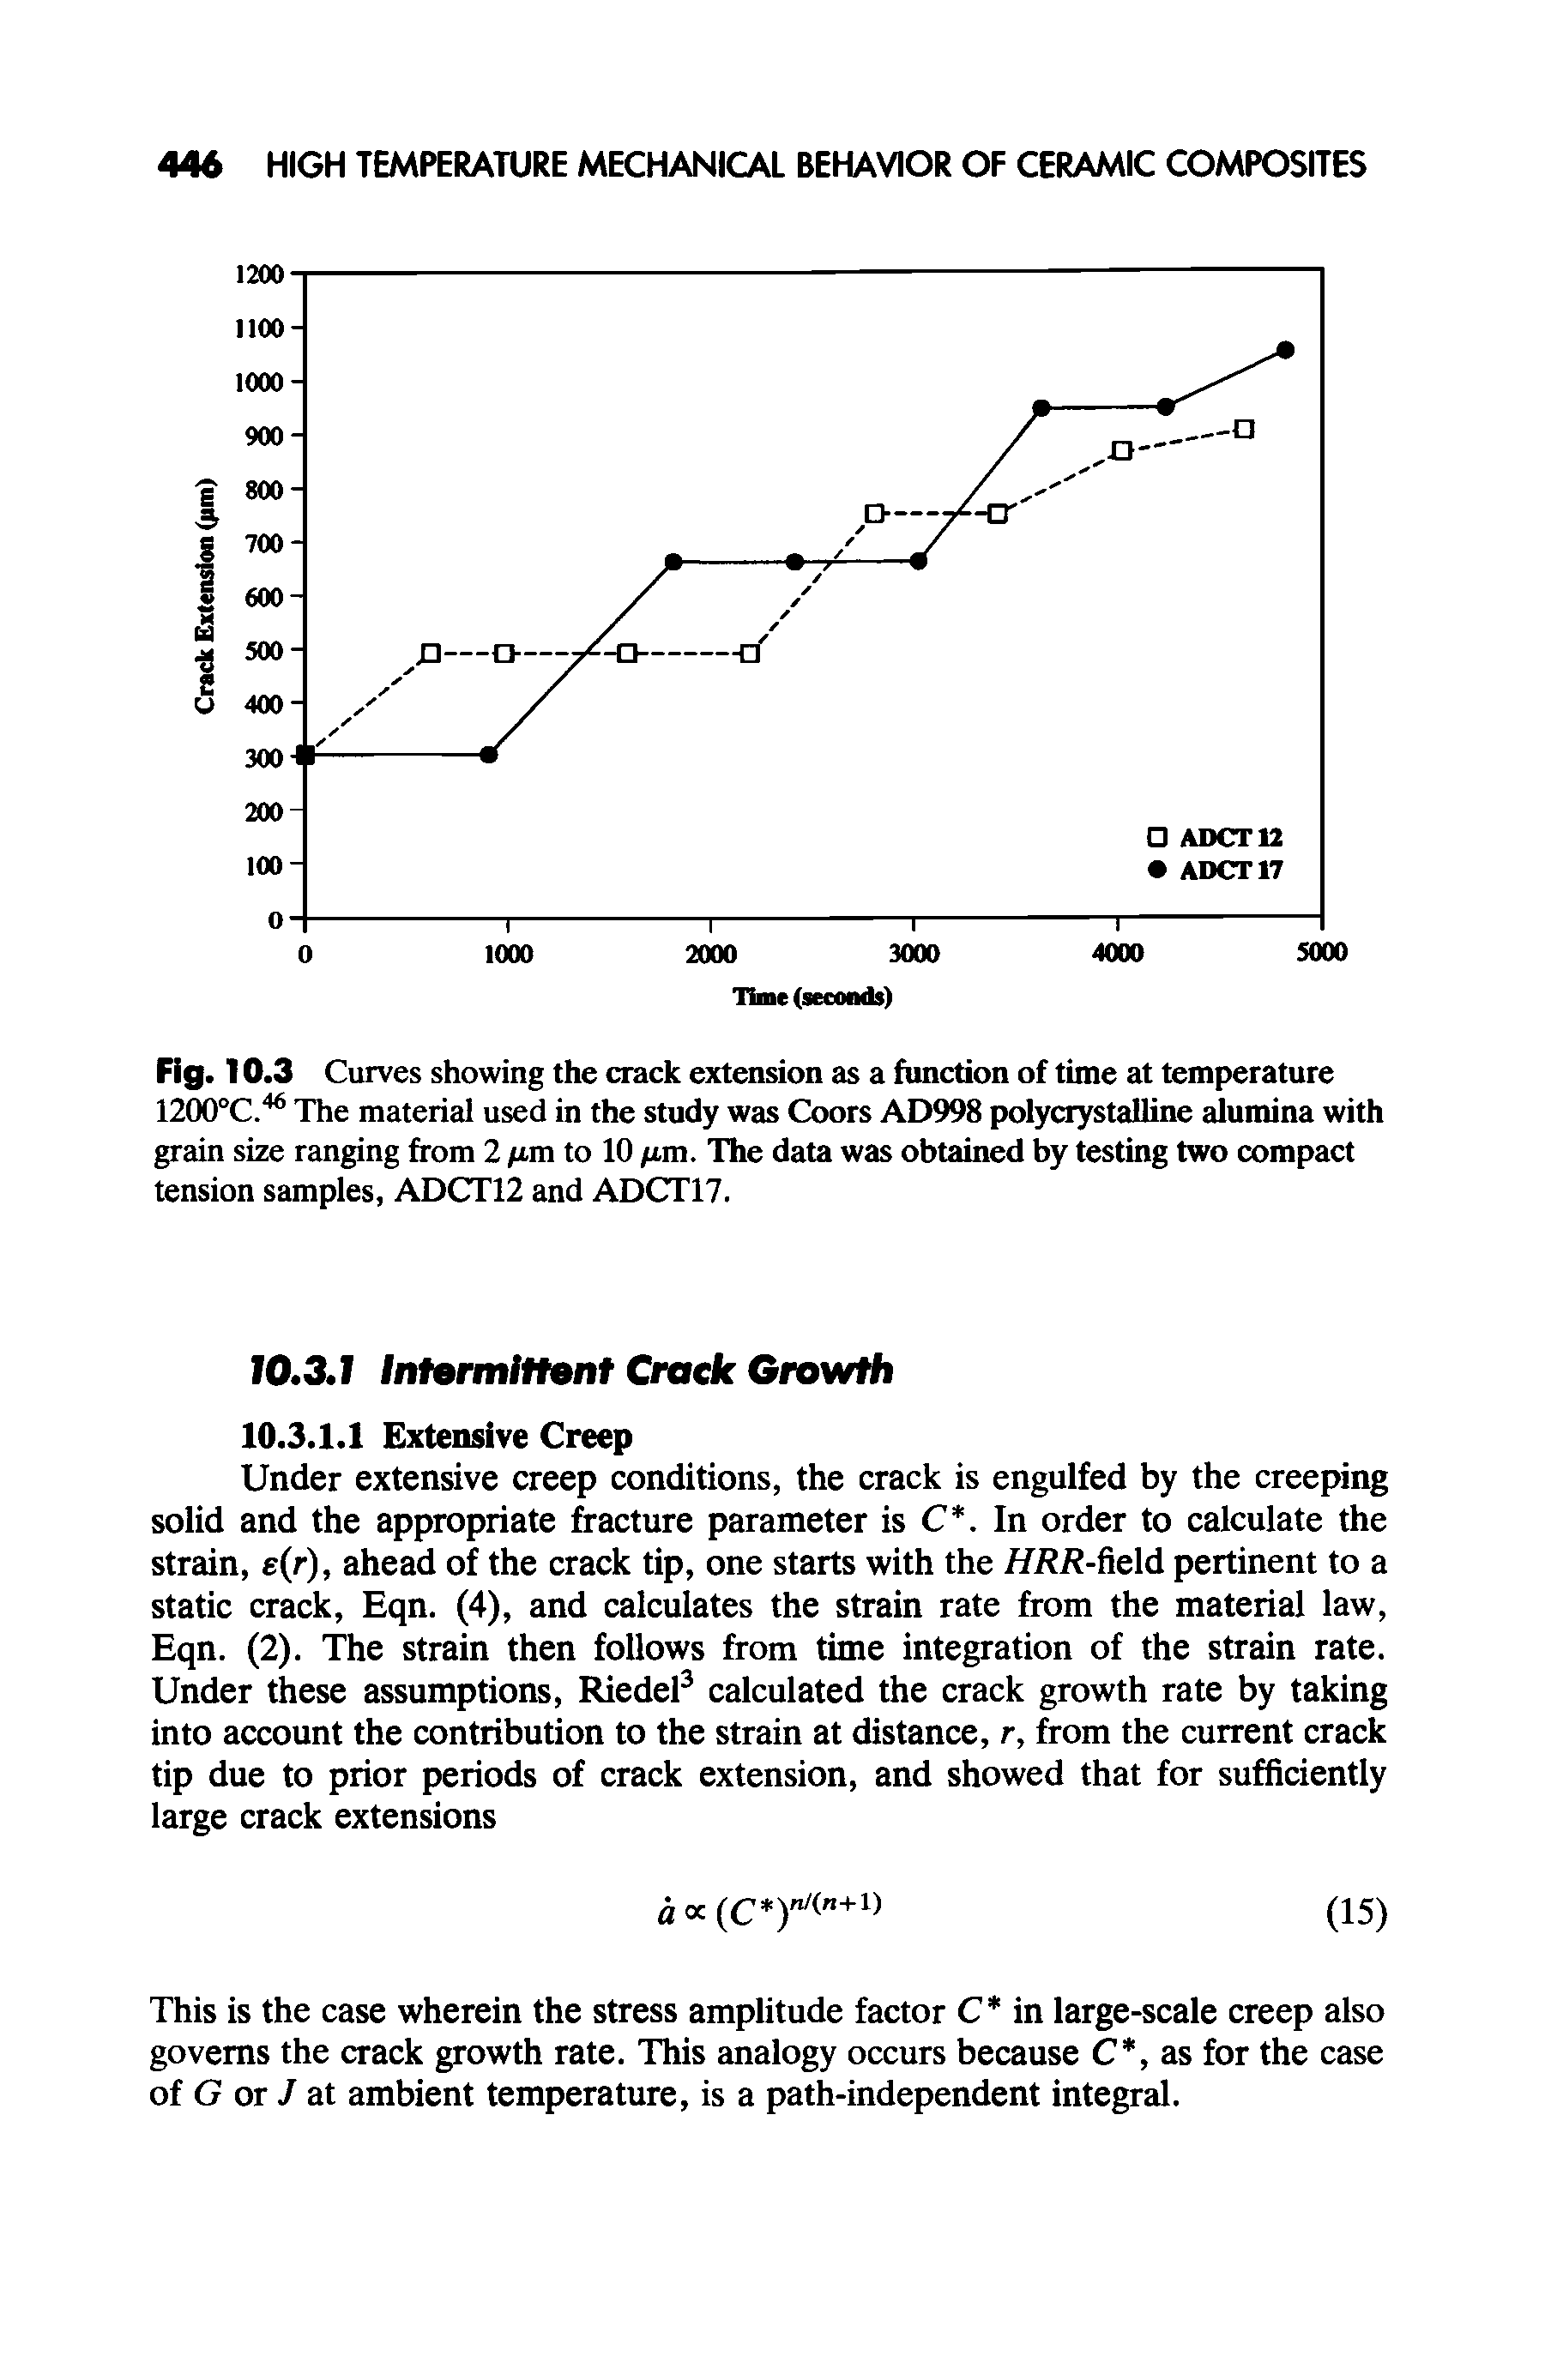 Fig. 10.3 Curves showing the crack extension as a function of time at temperature 1200°C.46 The material used in the study was Coors AD998 polycrystalline alumina with grain size ranging from 2 im to 10 /im. The data was obtained by testing two compact tension samples, ADCT12 and ADCT17.